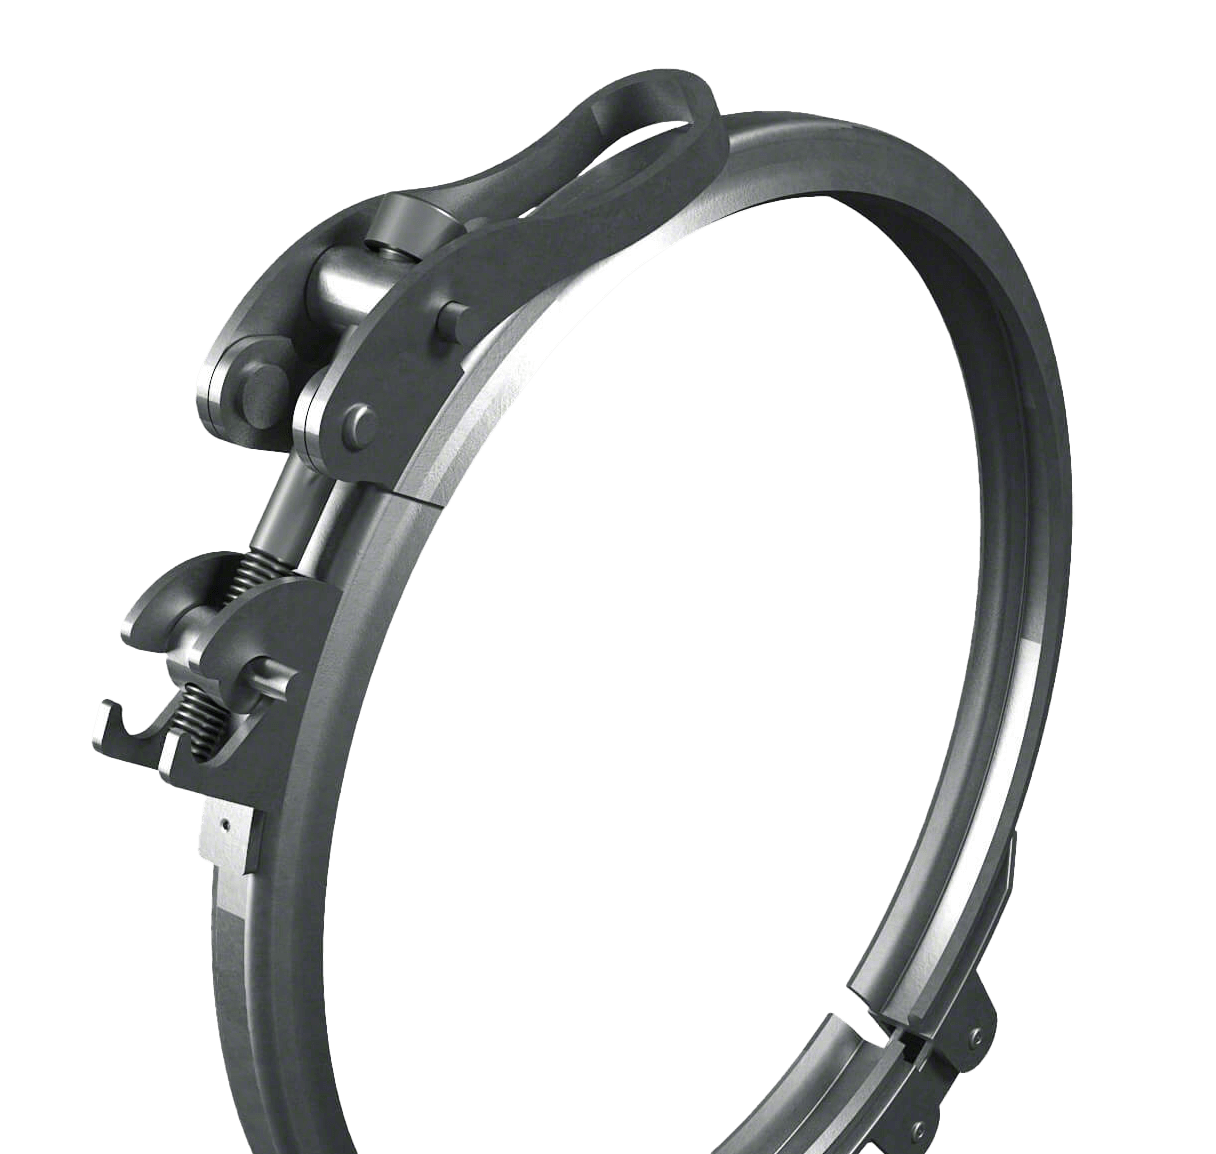 ESKATE® Quick-release clamping ring